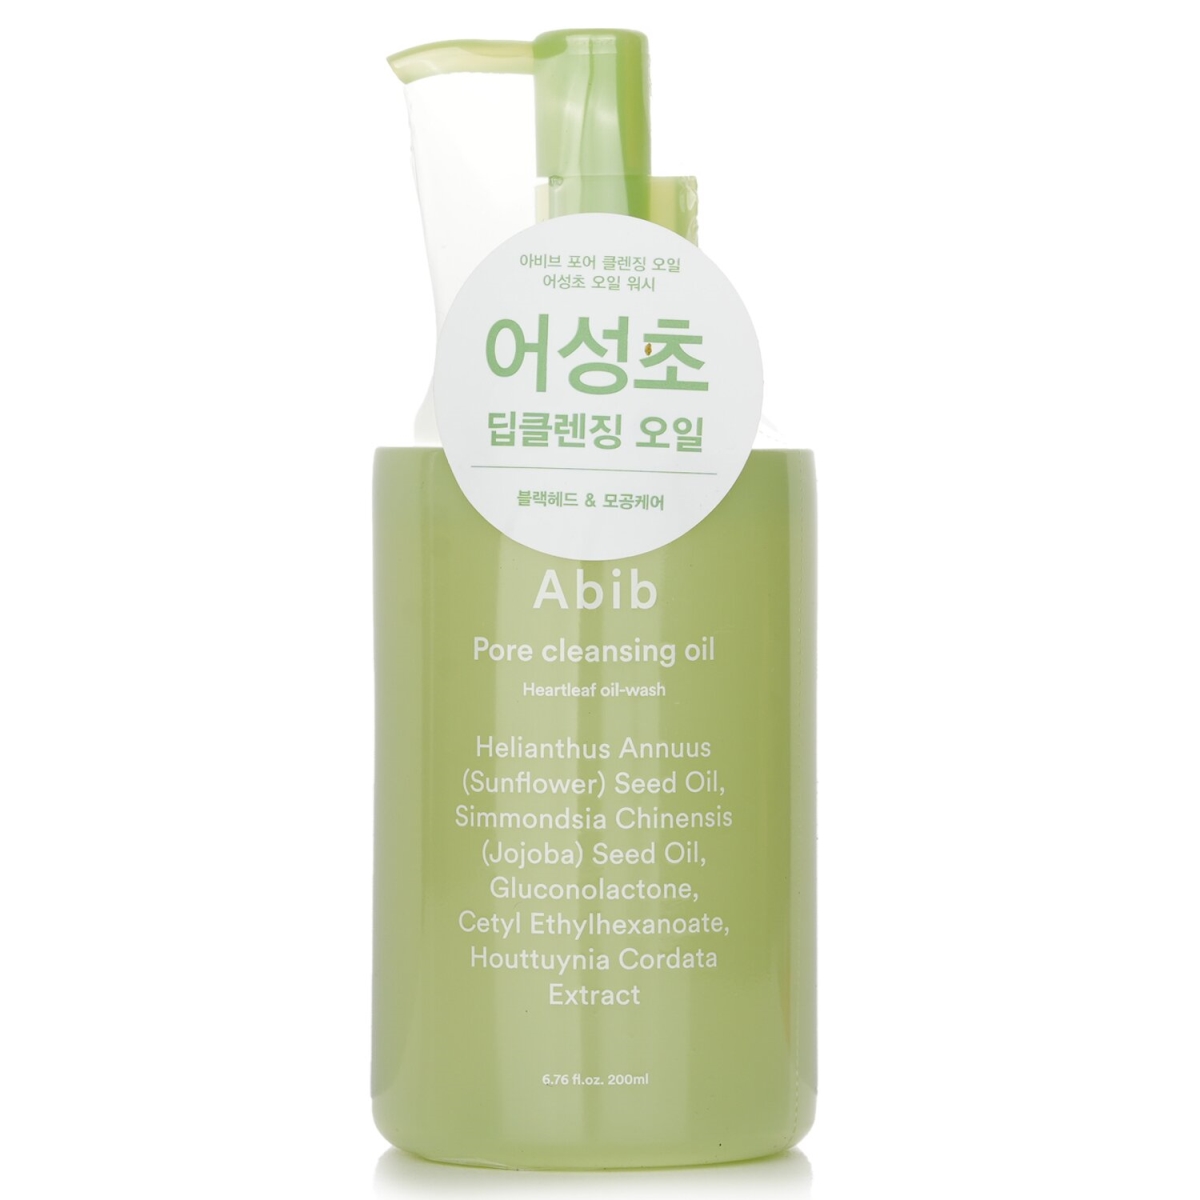 Picture of Abib 331562 200 ml Pore Cleansing Heartleaf Oil Wash